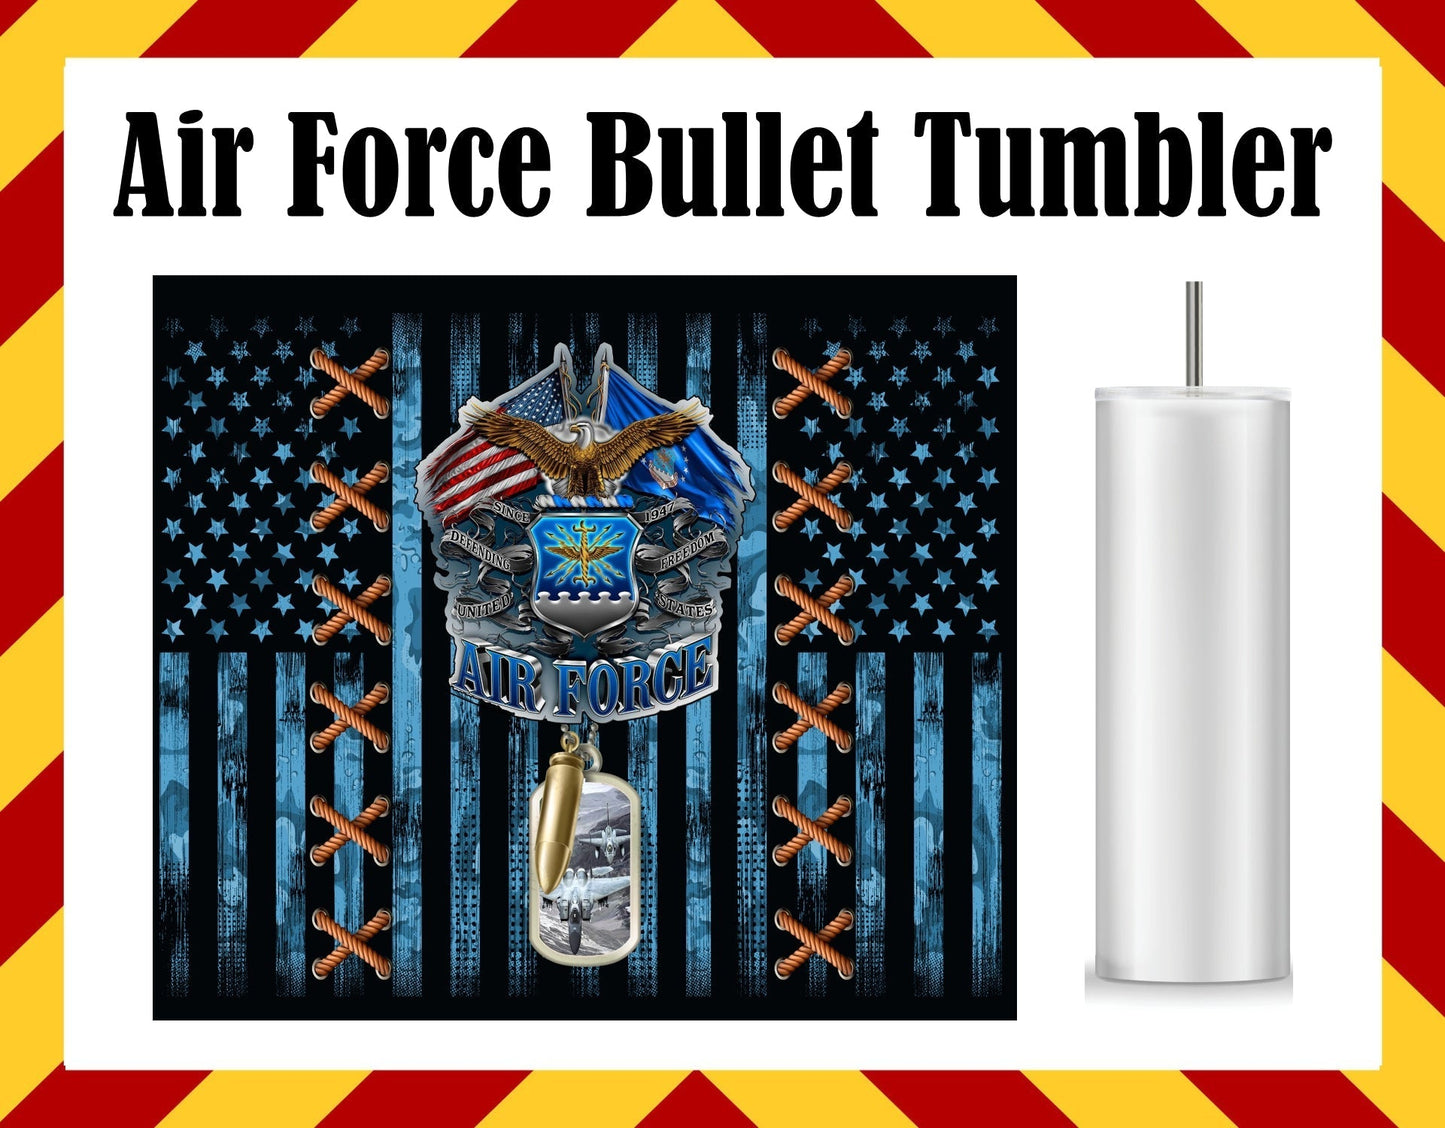 Stainless Steel Cup - Air Force Bullet Design Hot/Cold Cup